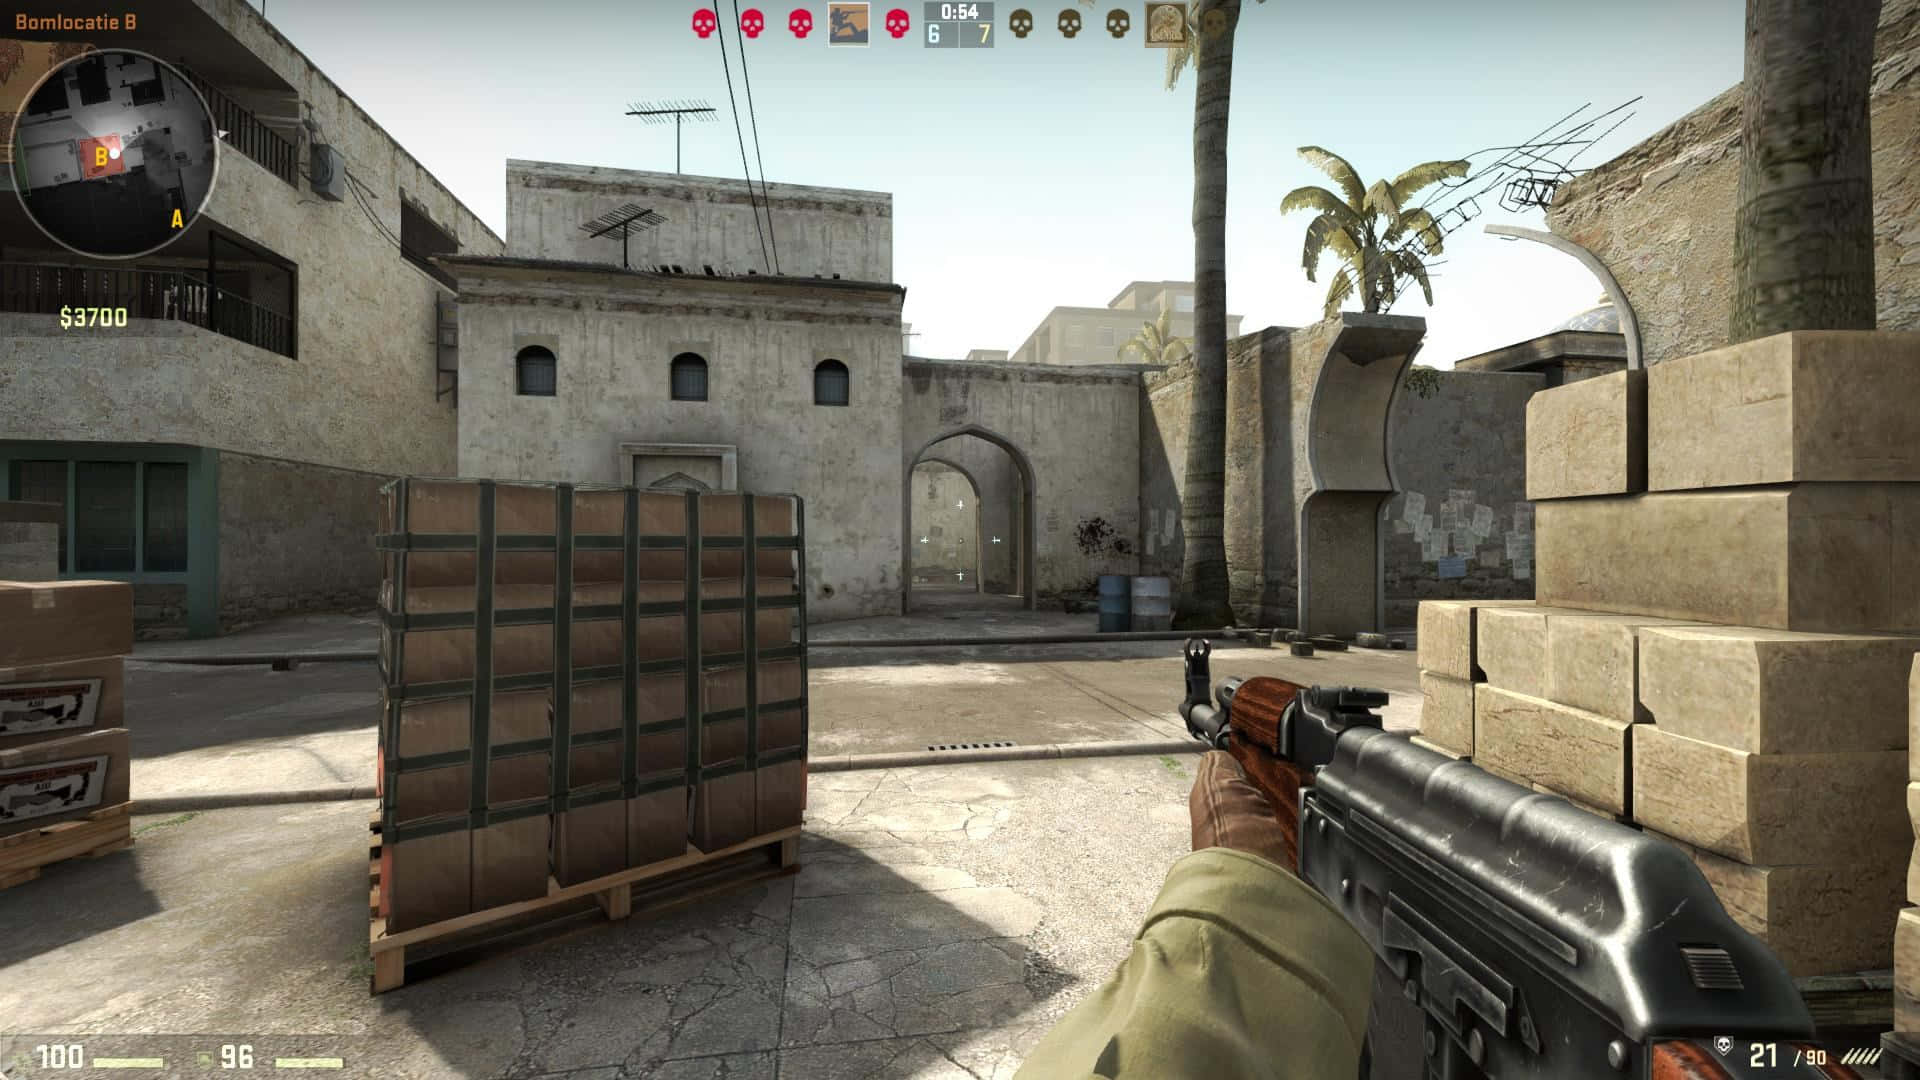 HD Counter-Strike: Global Player Location Background